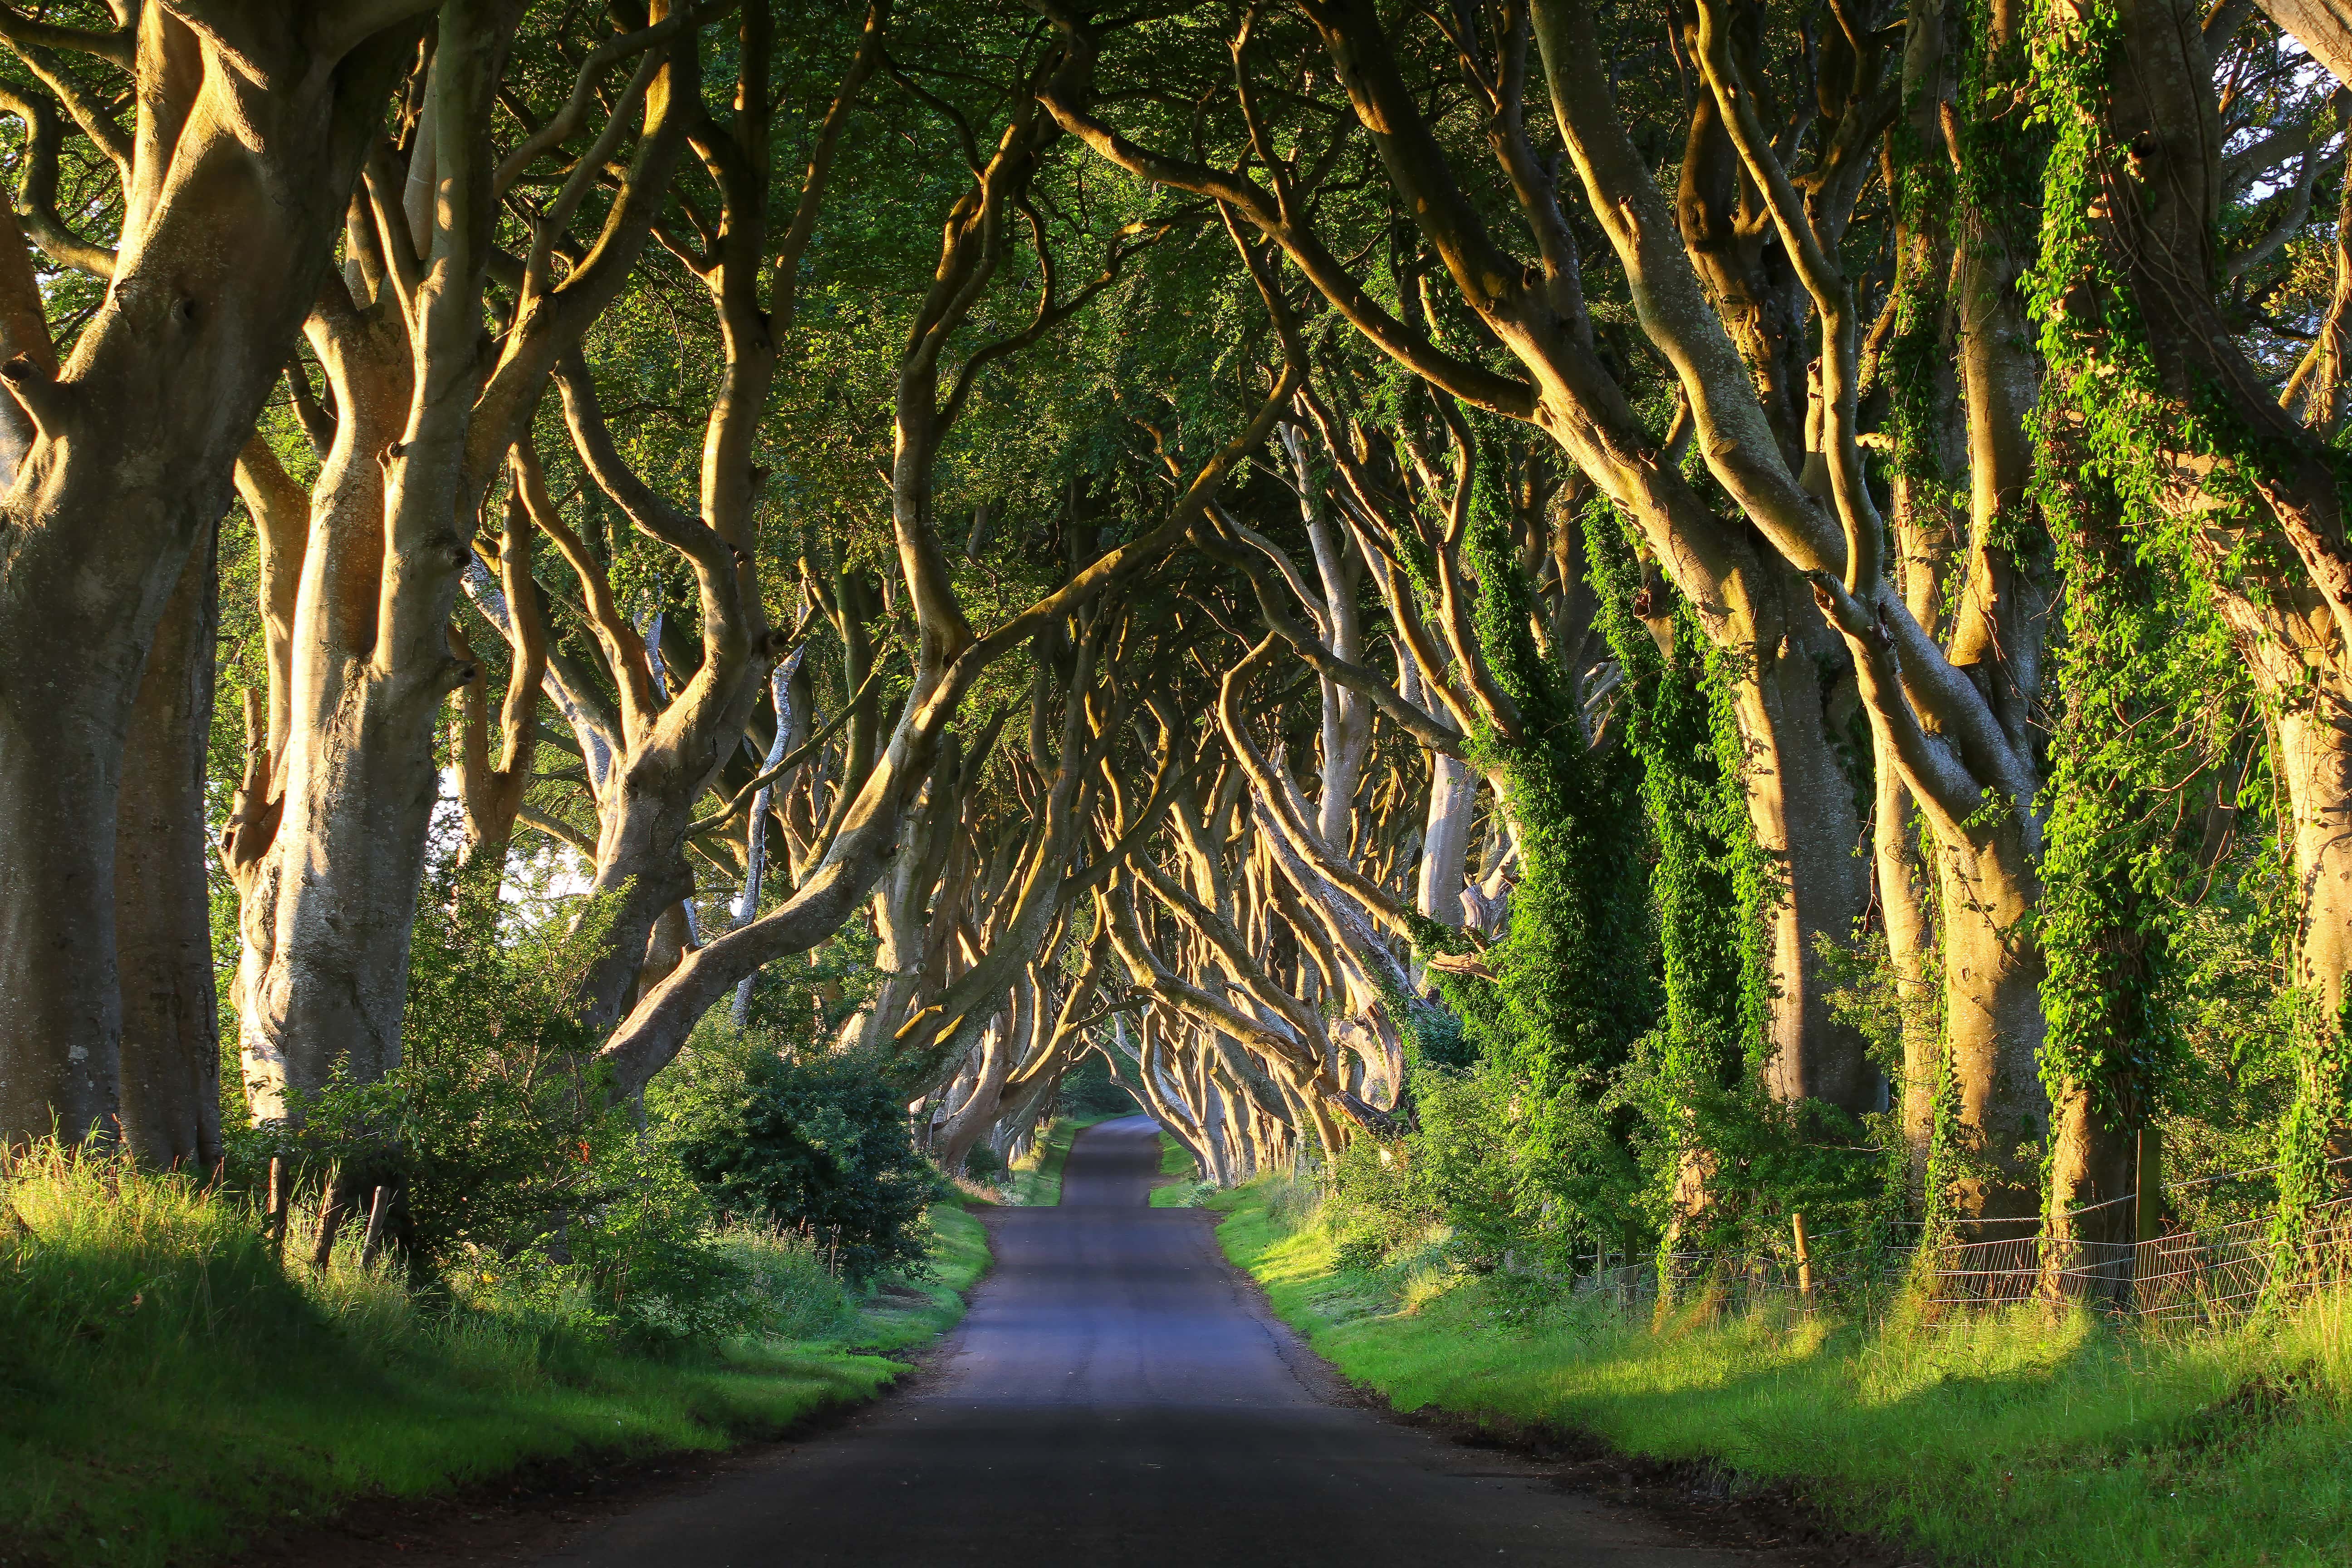 Game of Thrones Travel Guide: The Dark Hedges